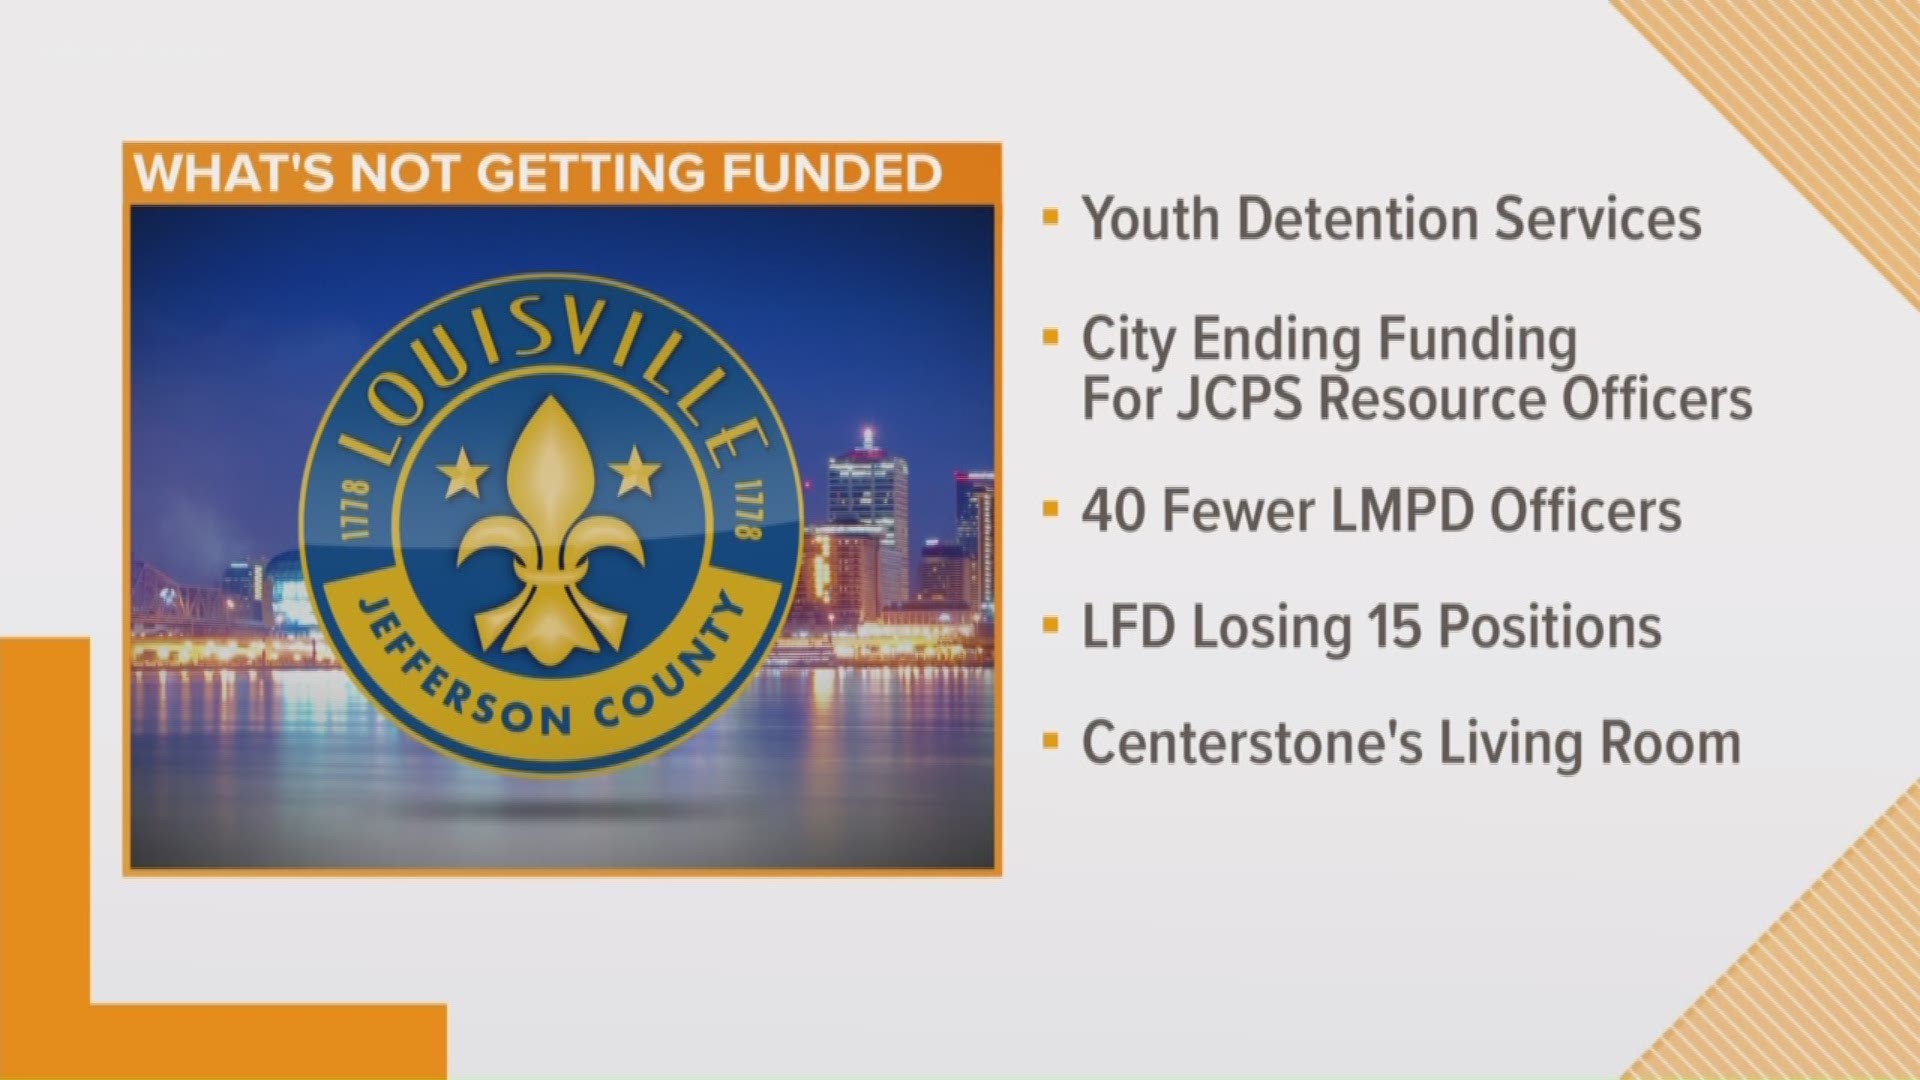 The budget will have money for two public pools and Dare to Care, but the Youth Detention Center will not be funded and JCPS will lose 17 school resources officers.